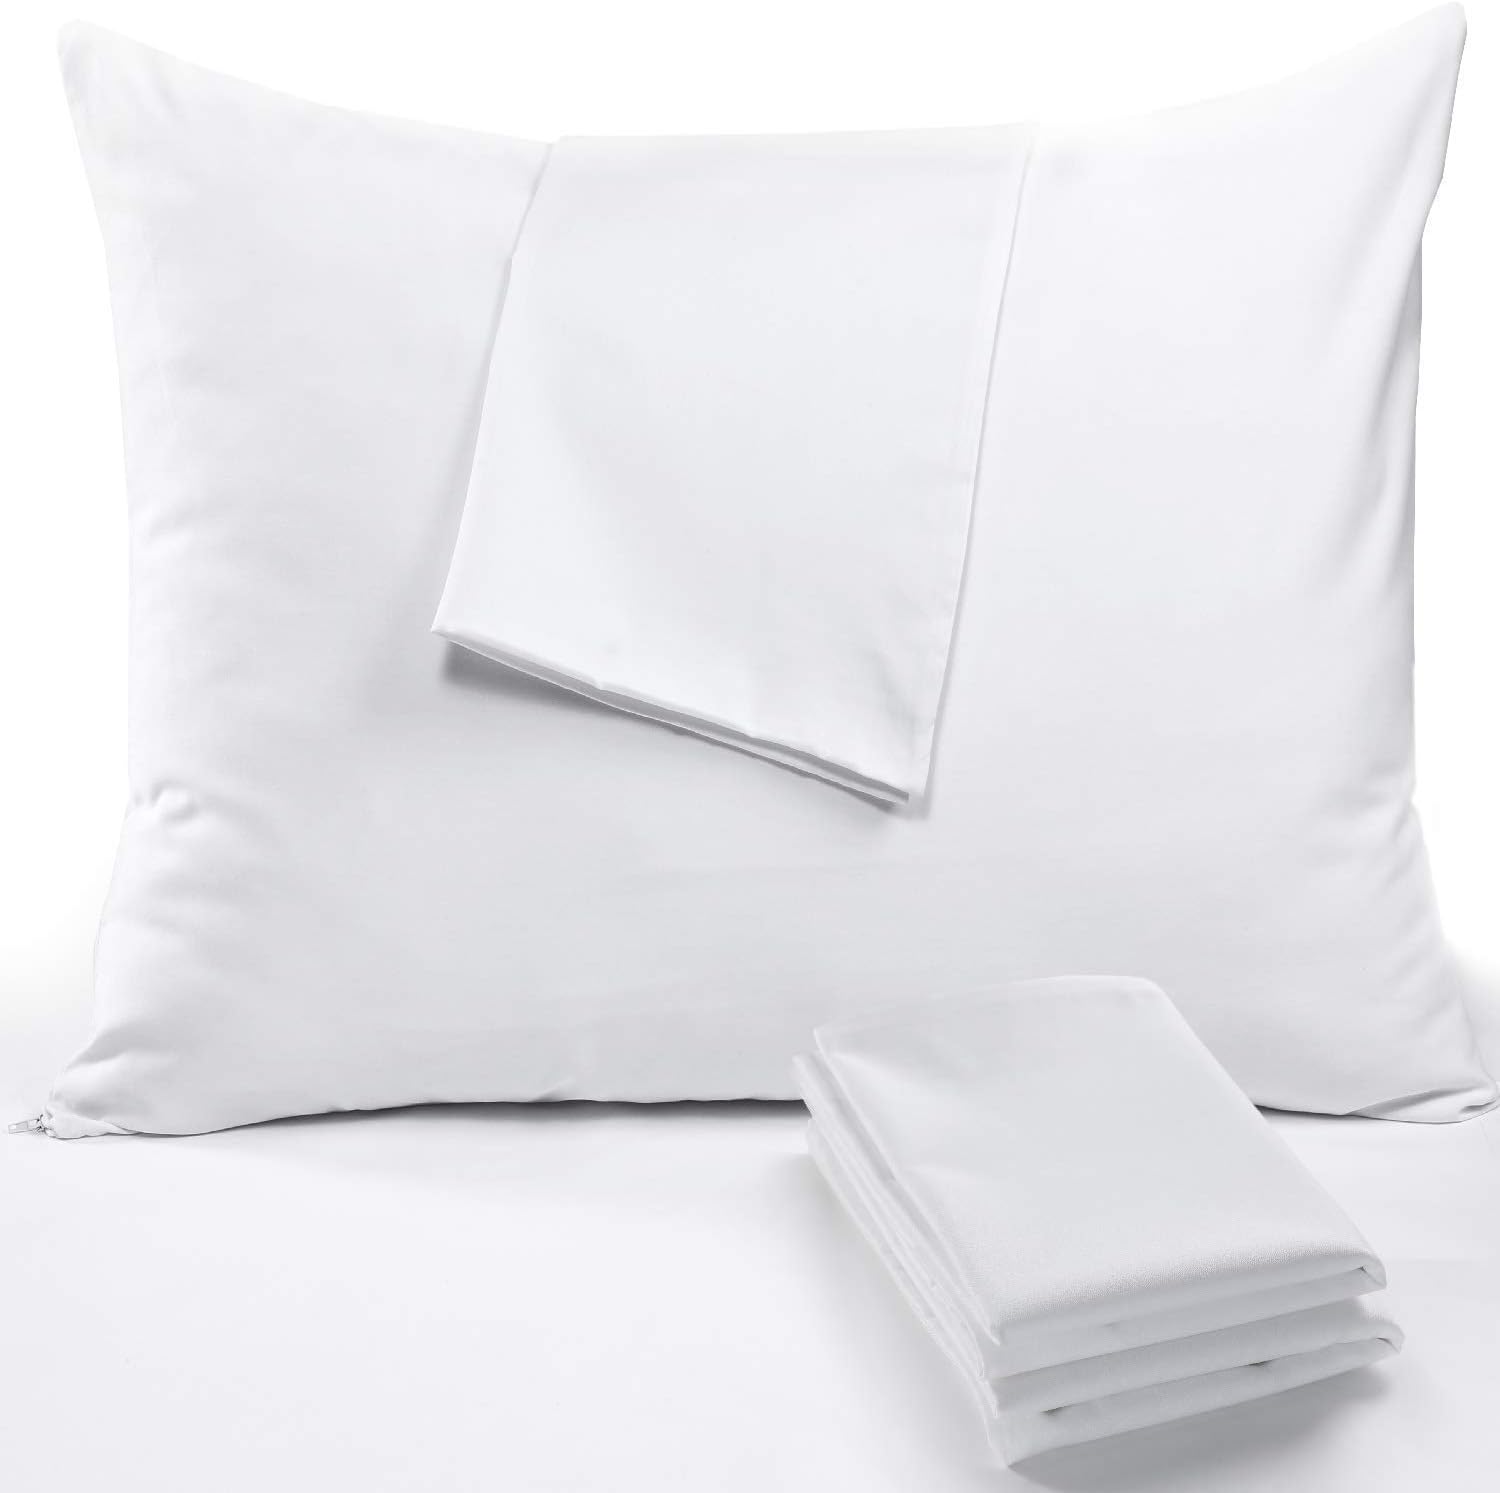 100% Cotton 4Pack Pillow Protectors King 20x36 Inches 3-4 Micron Pore Size Feather Proof Premium Cotton Tight Weave Cases Covers Non Noisy Zippered Breathable Non Noisy